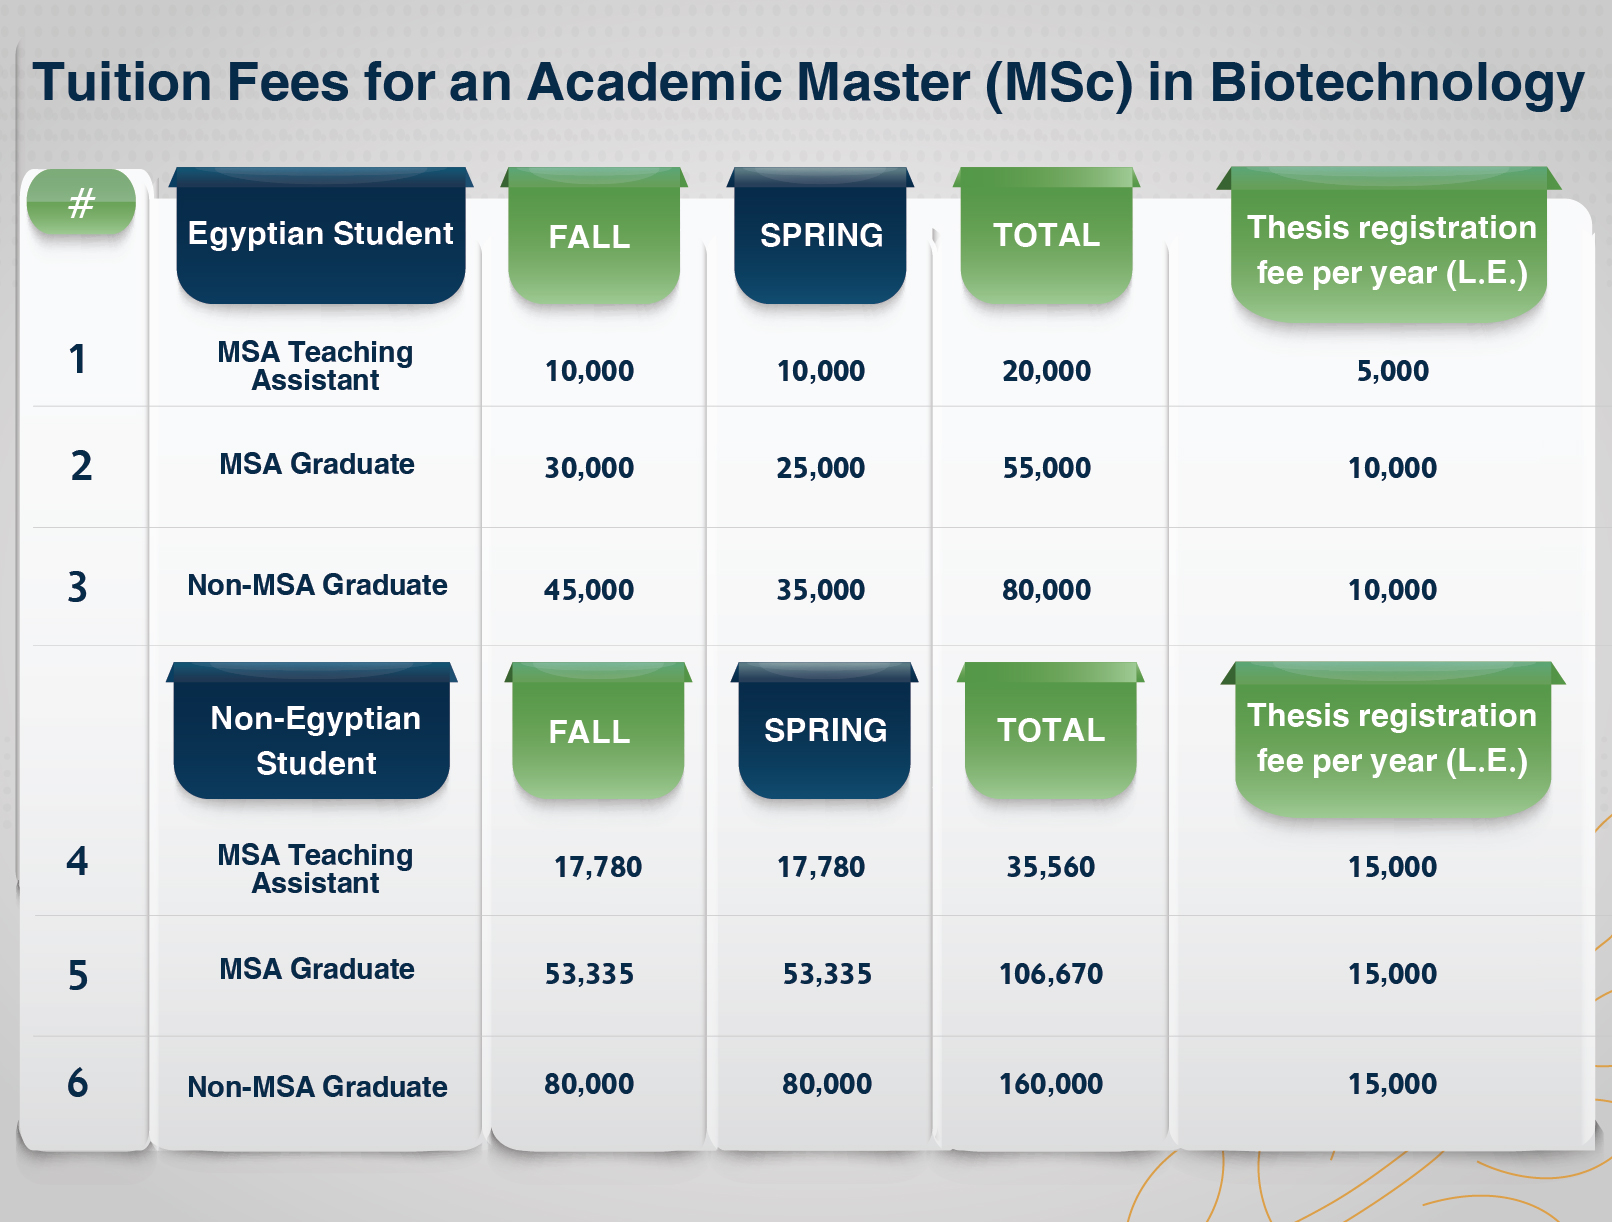 MSA University - MSc in biotechnology Tuition Fees